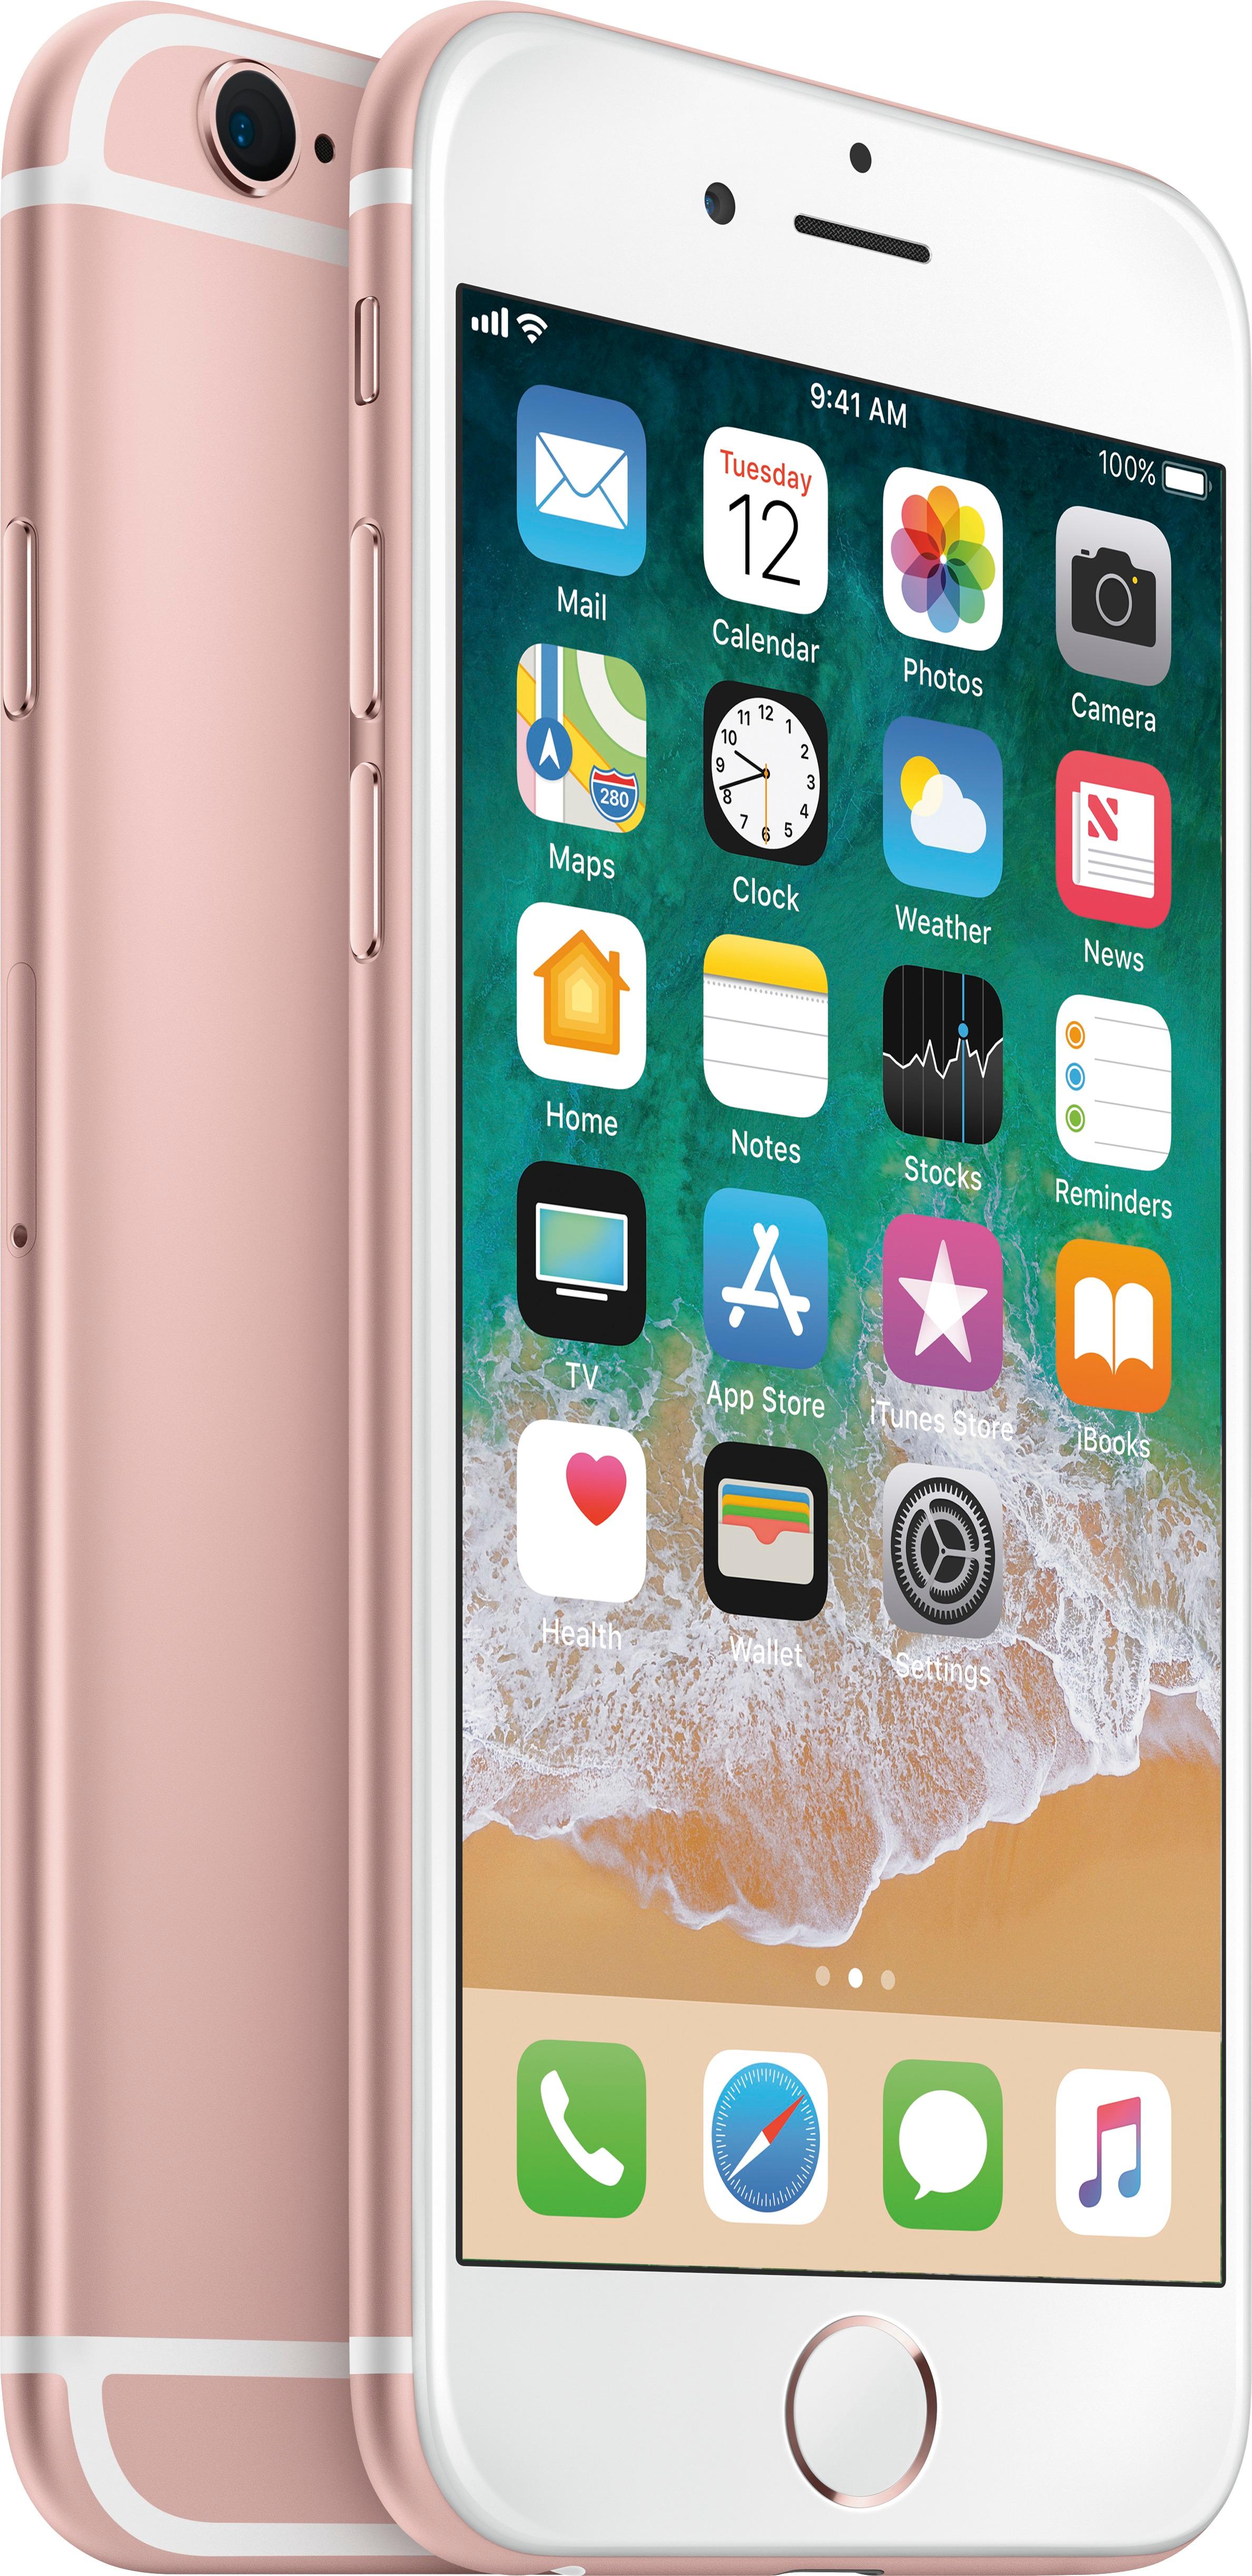 slank gebouw Stuwkracht Best Buy: Apple Pre-Owned iPhone 6s 4G LTE with 64GB Cell Phone (Unlocked)  Rose Gold 6S 64GB ROSE GOLD-RB